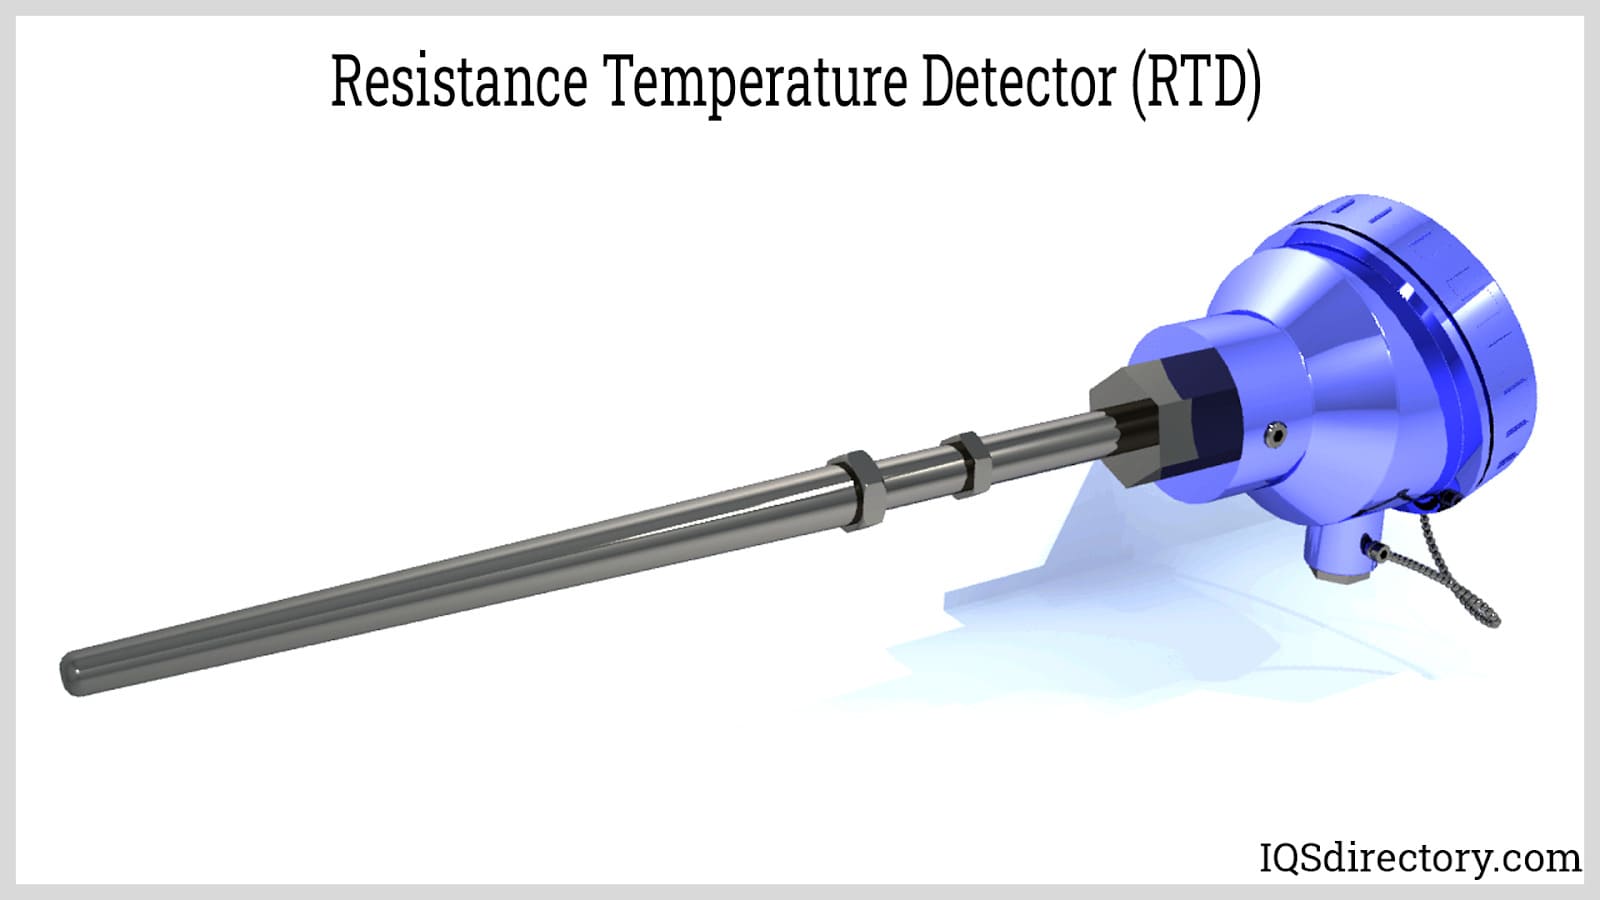 https://www.iqsdirectory.com/articles/thermocouple/rtd-sensors/resistance-temperature-detector.jpg